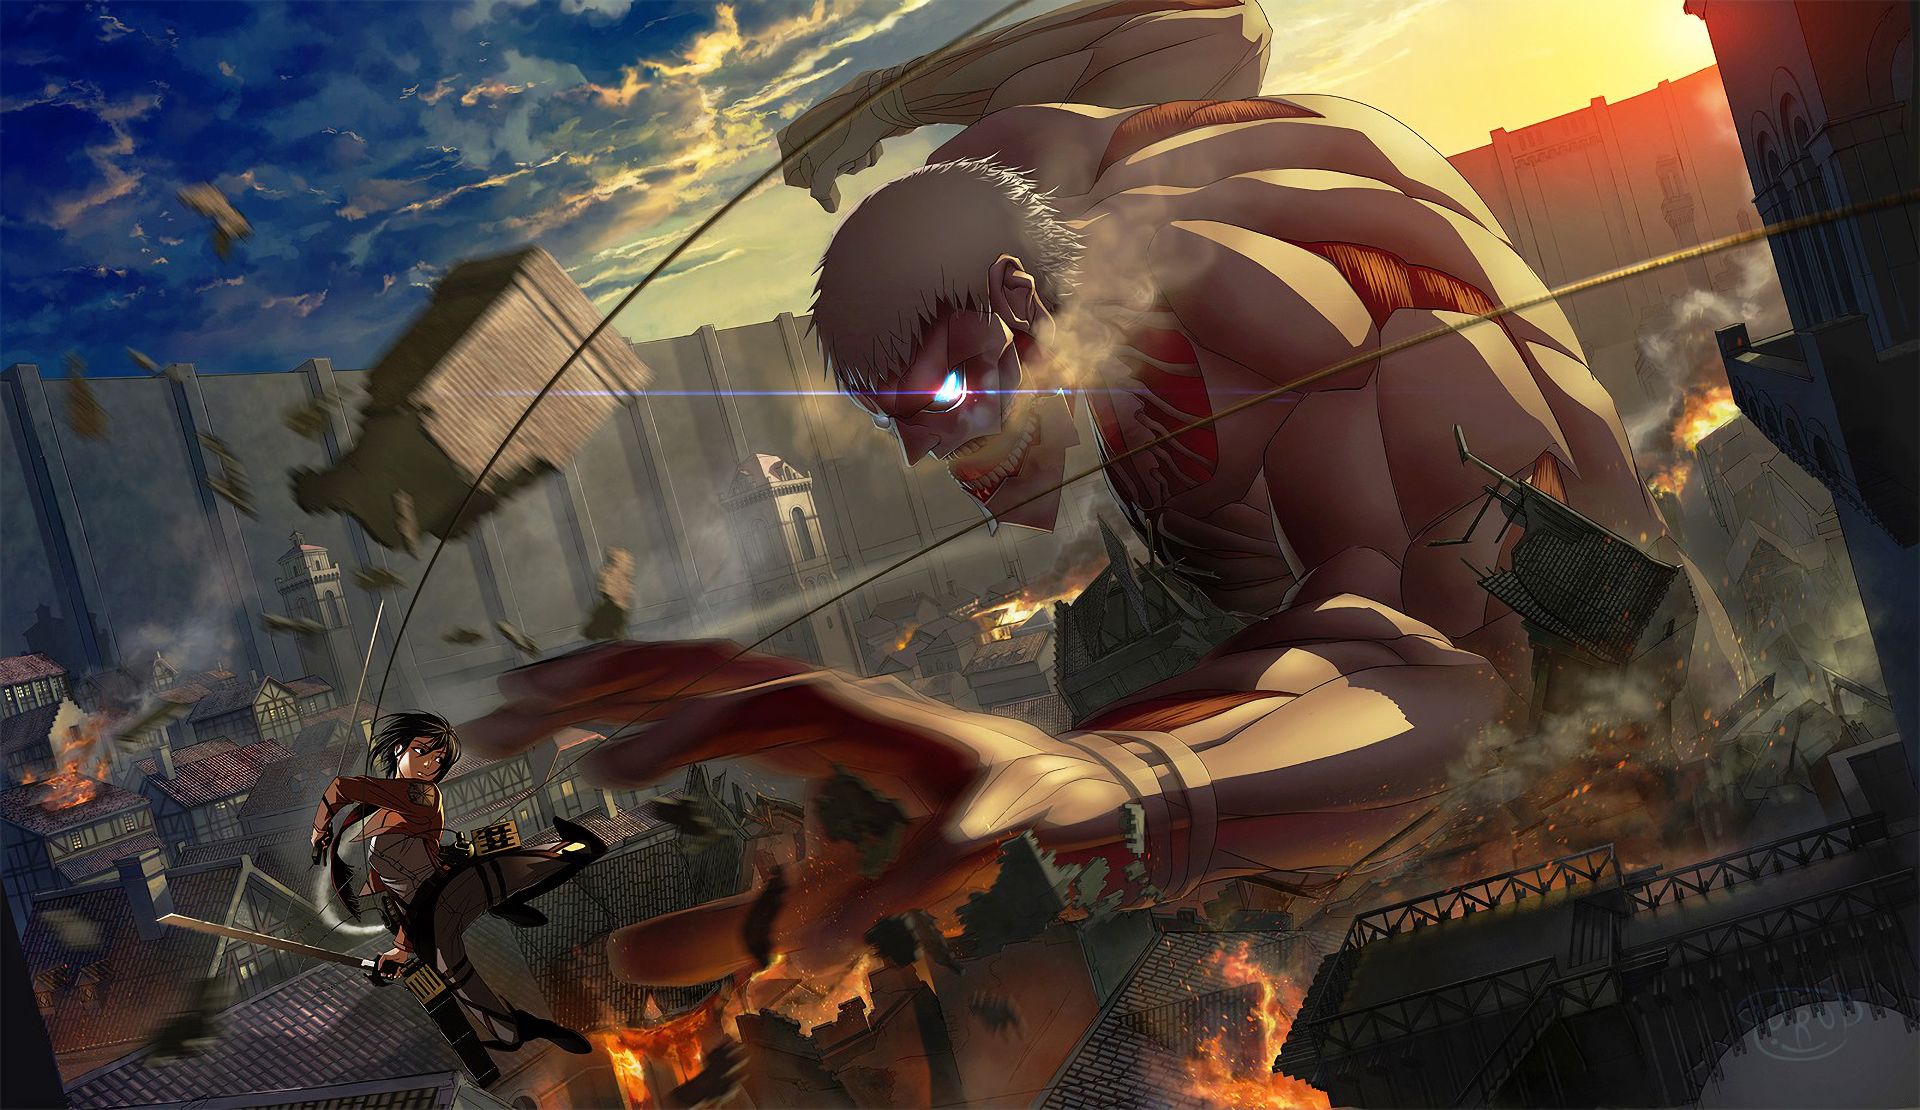 glowing eyes, mikasa ackerman, sword, fire Sky HQ Background Images